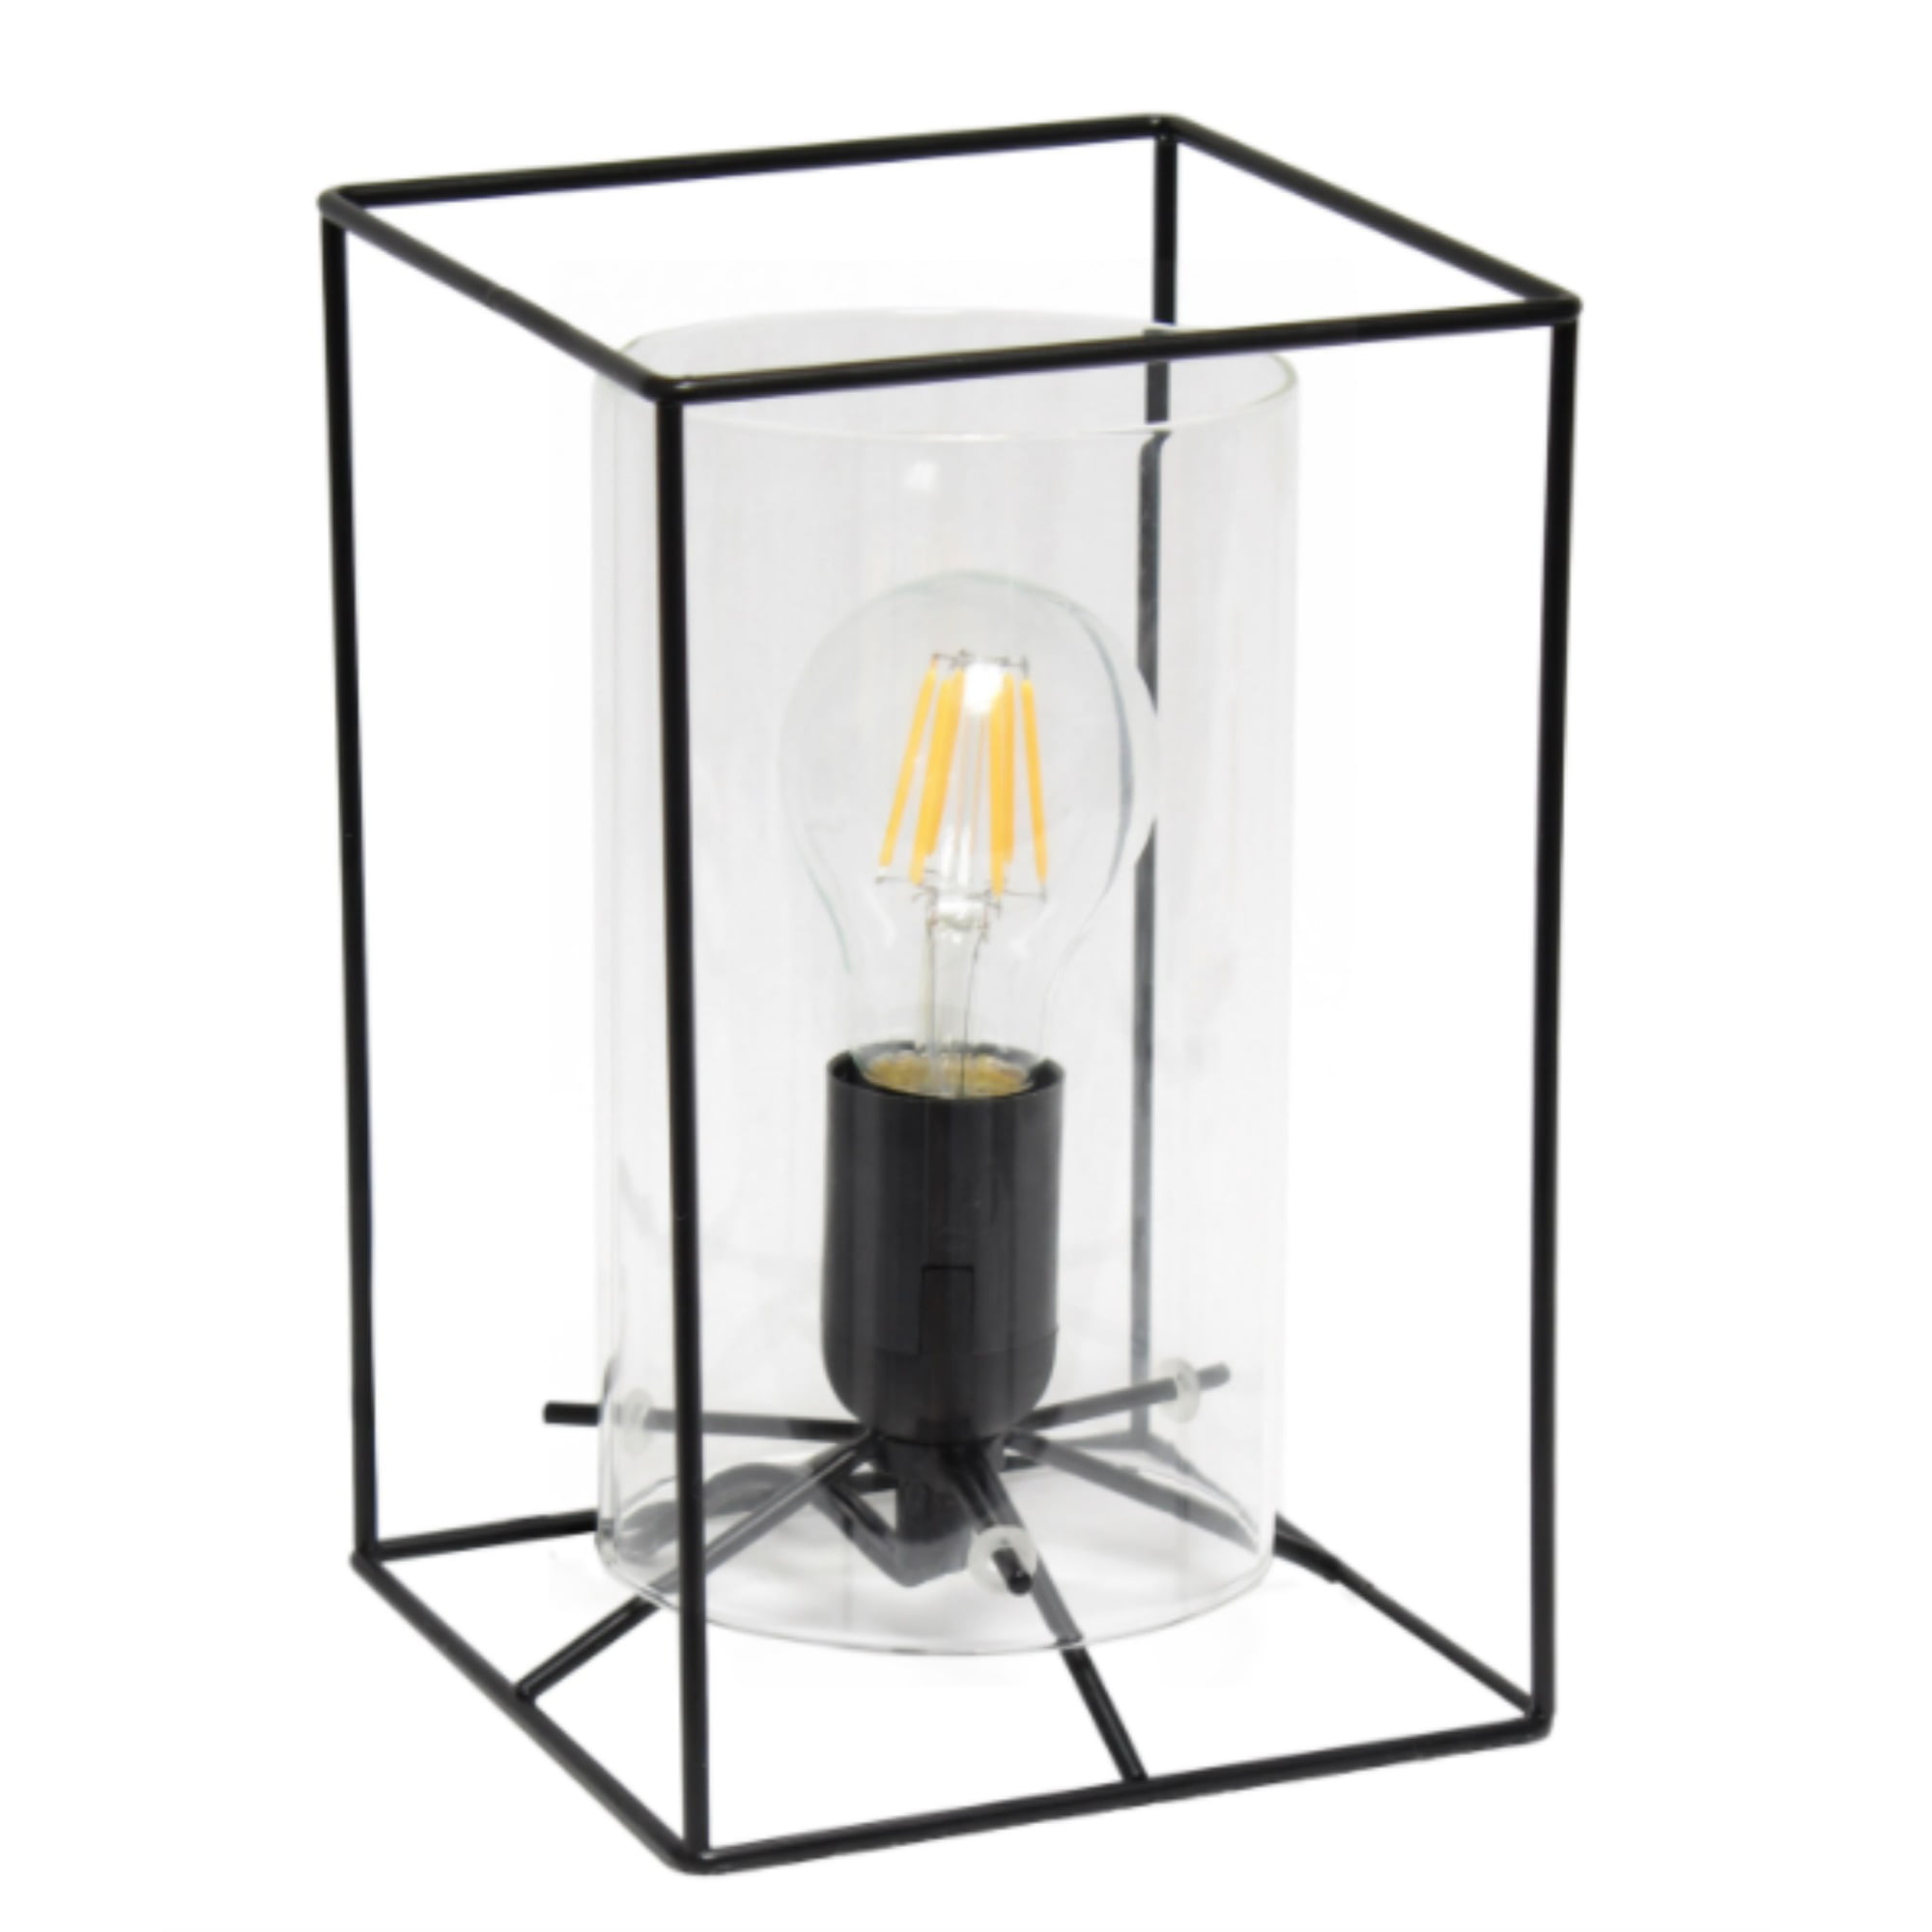  Lalia Home Black Framed Table Lamp with Clear Cylinder Glass Shade, Small